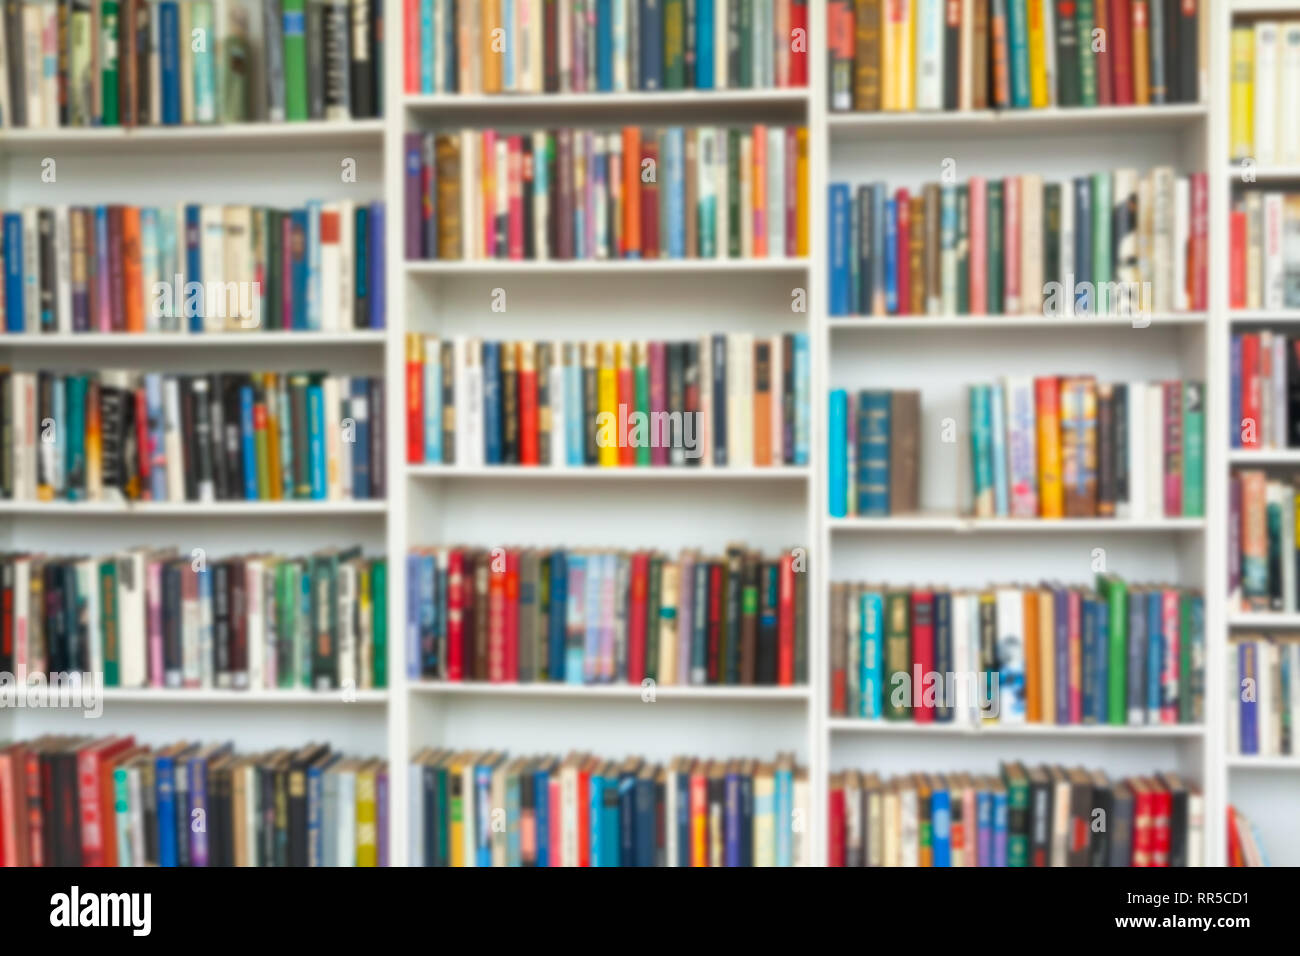 Blurred Image Of Colorful Bookshelf In Secondhand Shop Stock Photo Alamy